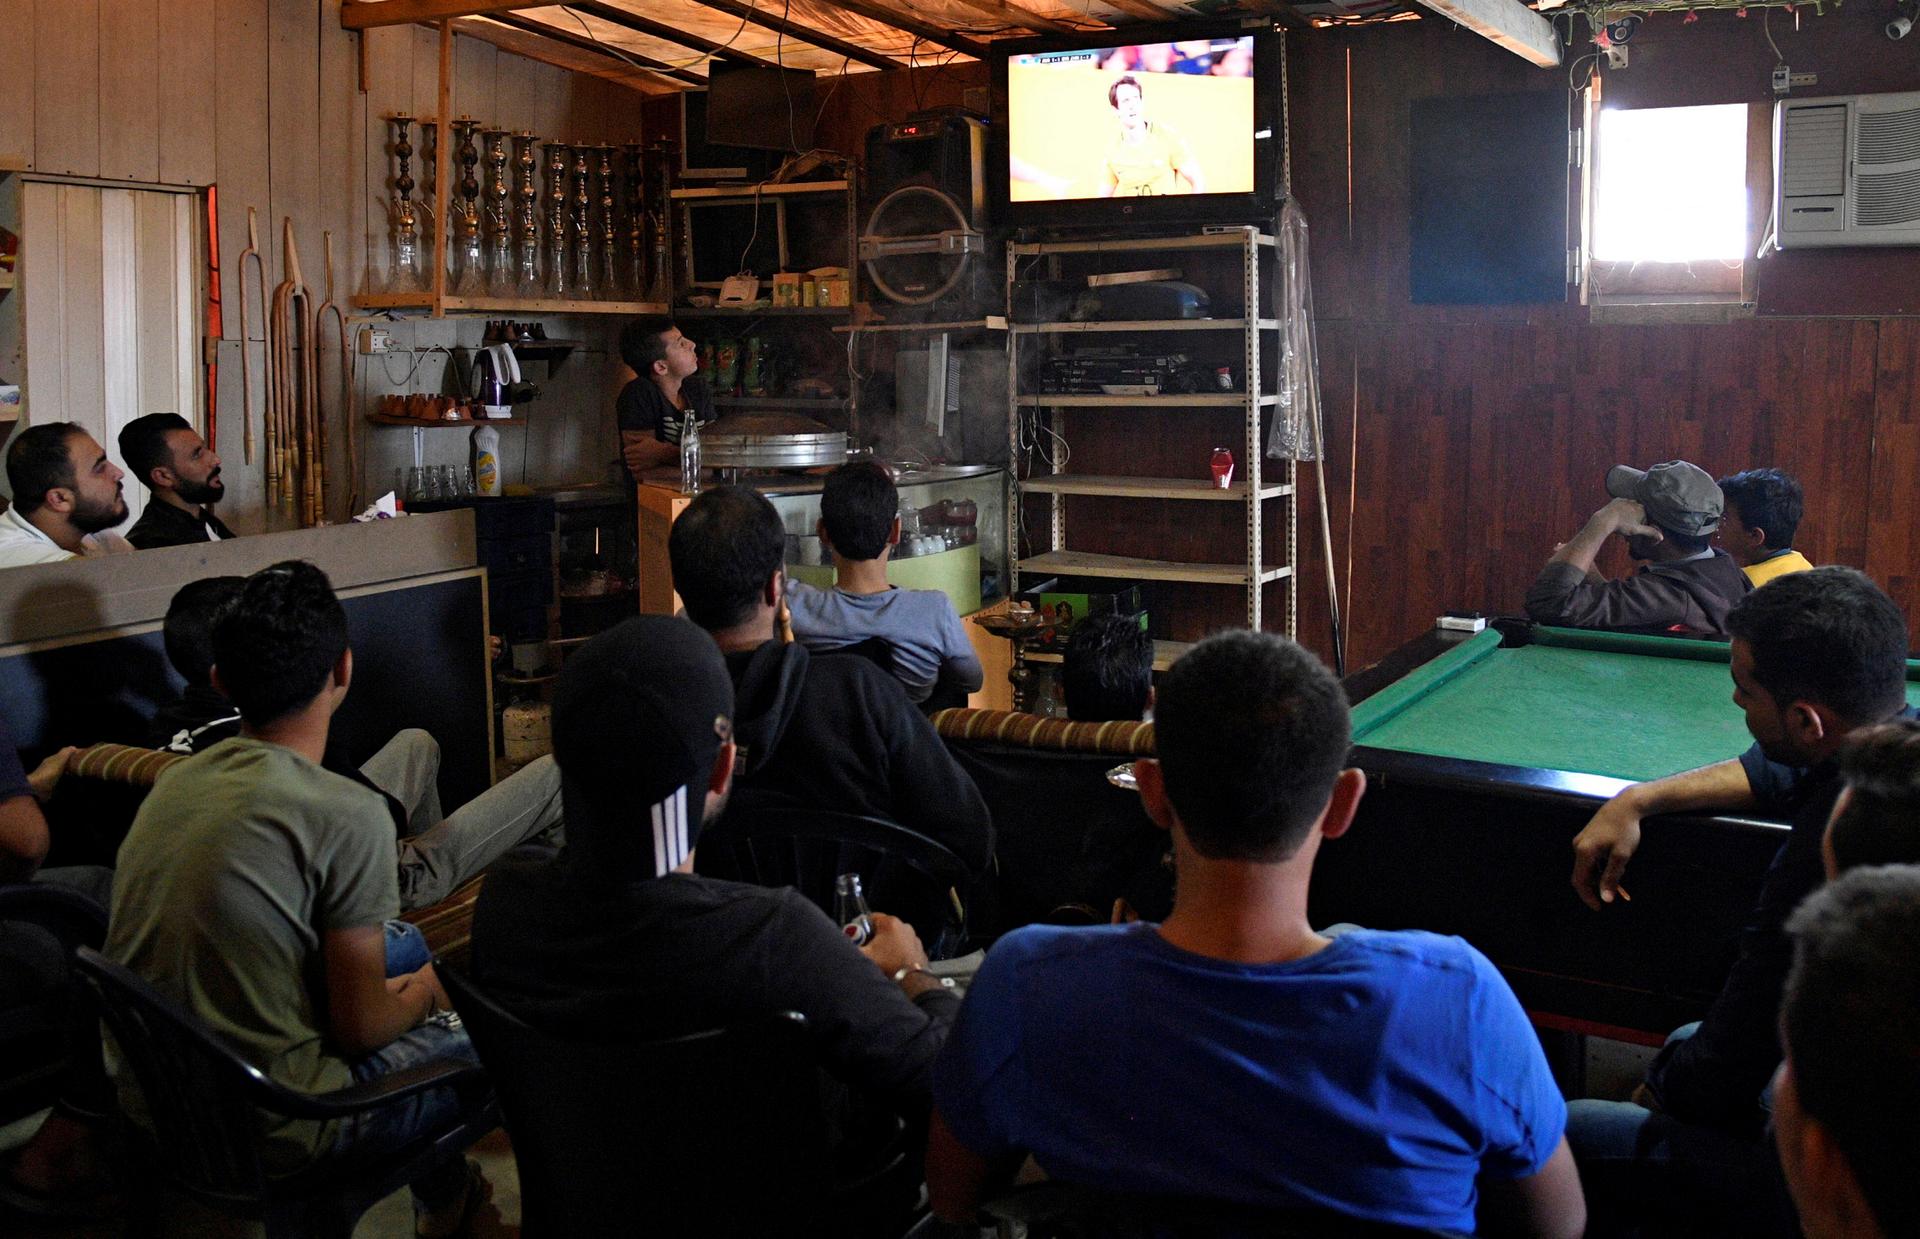 Syrians watch the World Cup 2018 qualifier between Australia and Syria inside a refugee camp in Bar Elias, in the Bekaa Valley, Lebanon, Oct. 10, 2017.